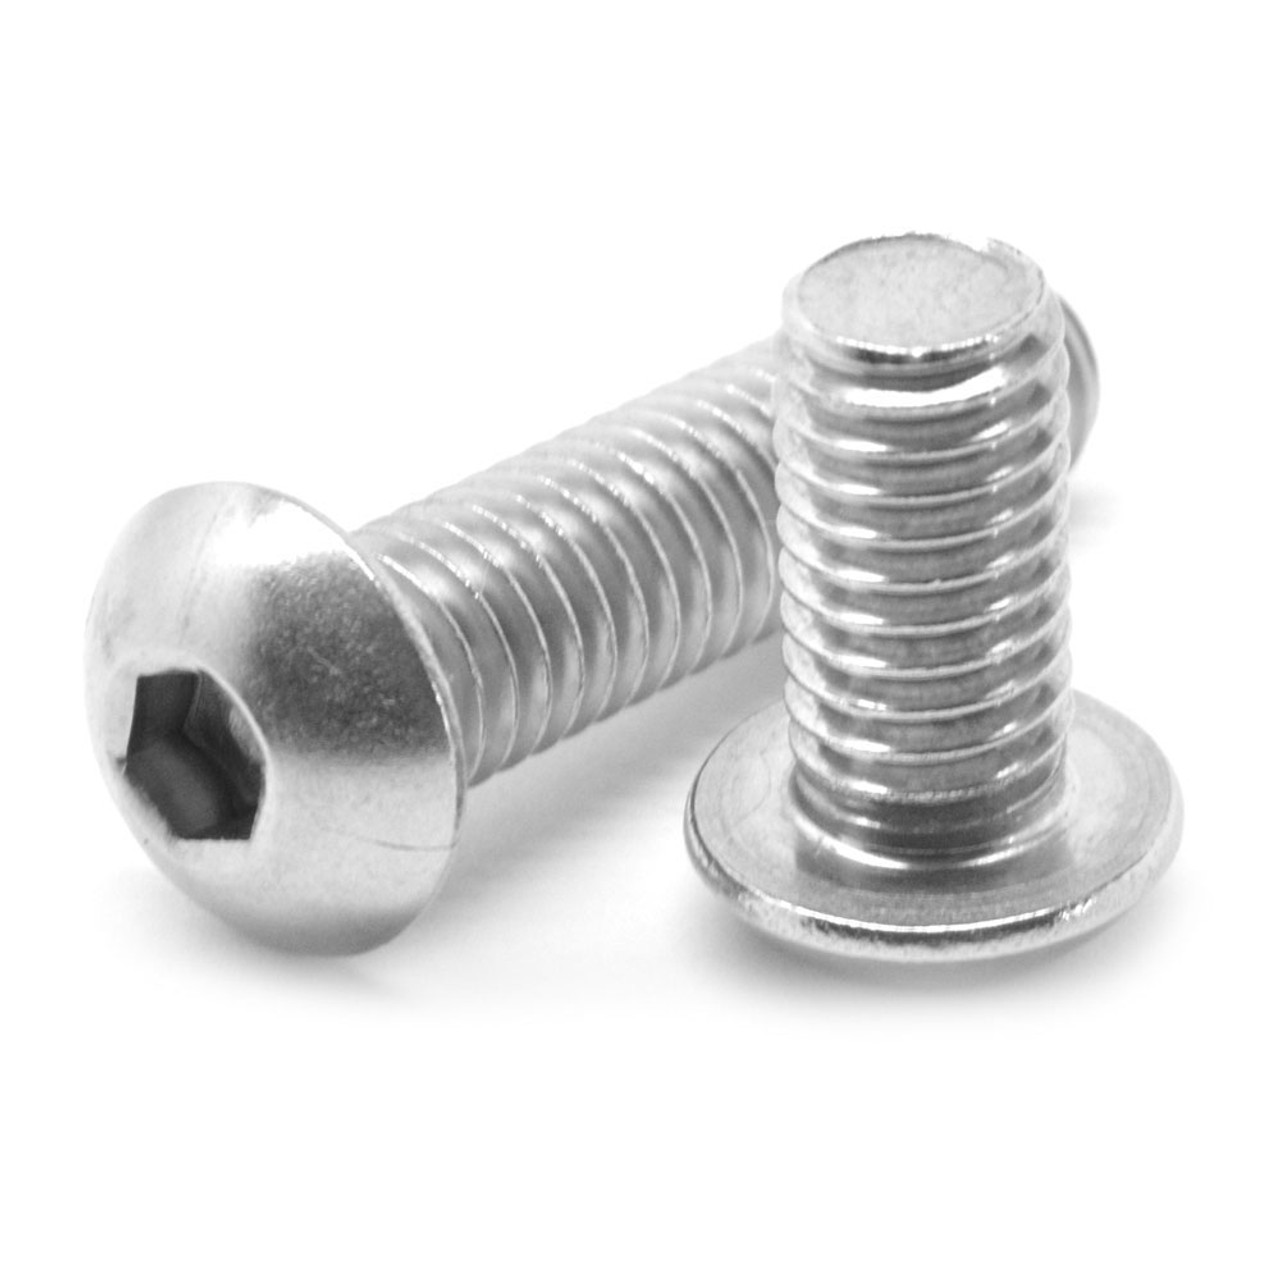 M6 x 1.00 x 14 MM (FT) Coarse Thread ISO 7380 Socket Button Head Cap Screw Stainless Steel 18-8